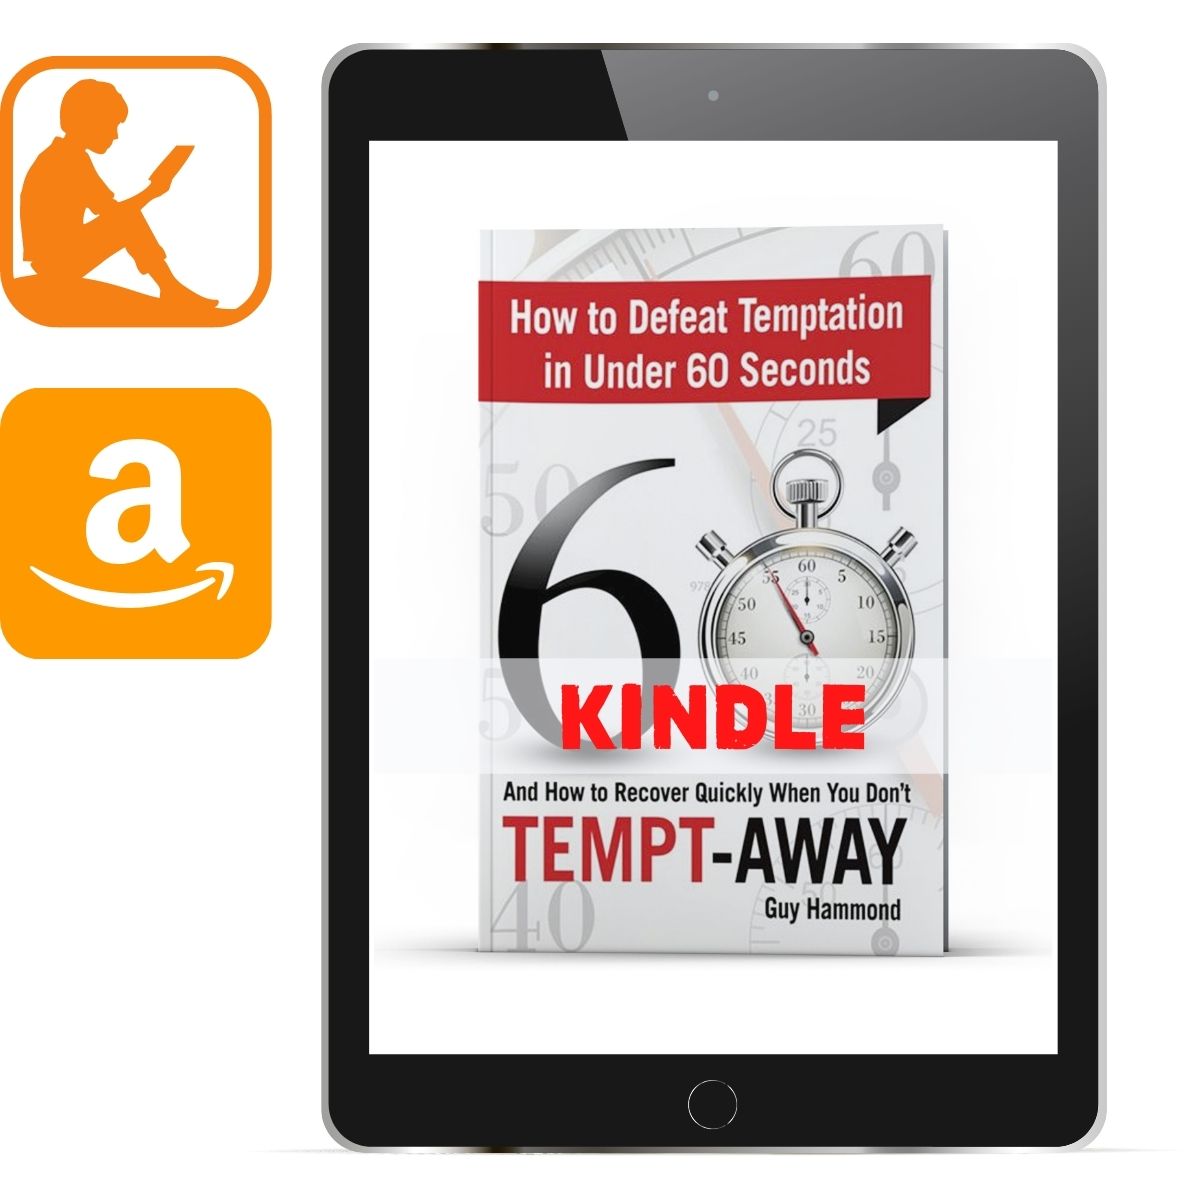 Tempt-Away: How to Defeat Temptation in Under 60 Seconds Kindle - Illumination Publishers